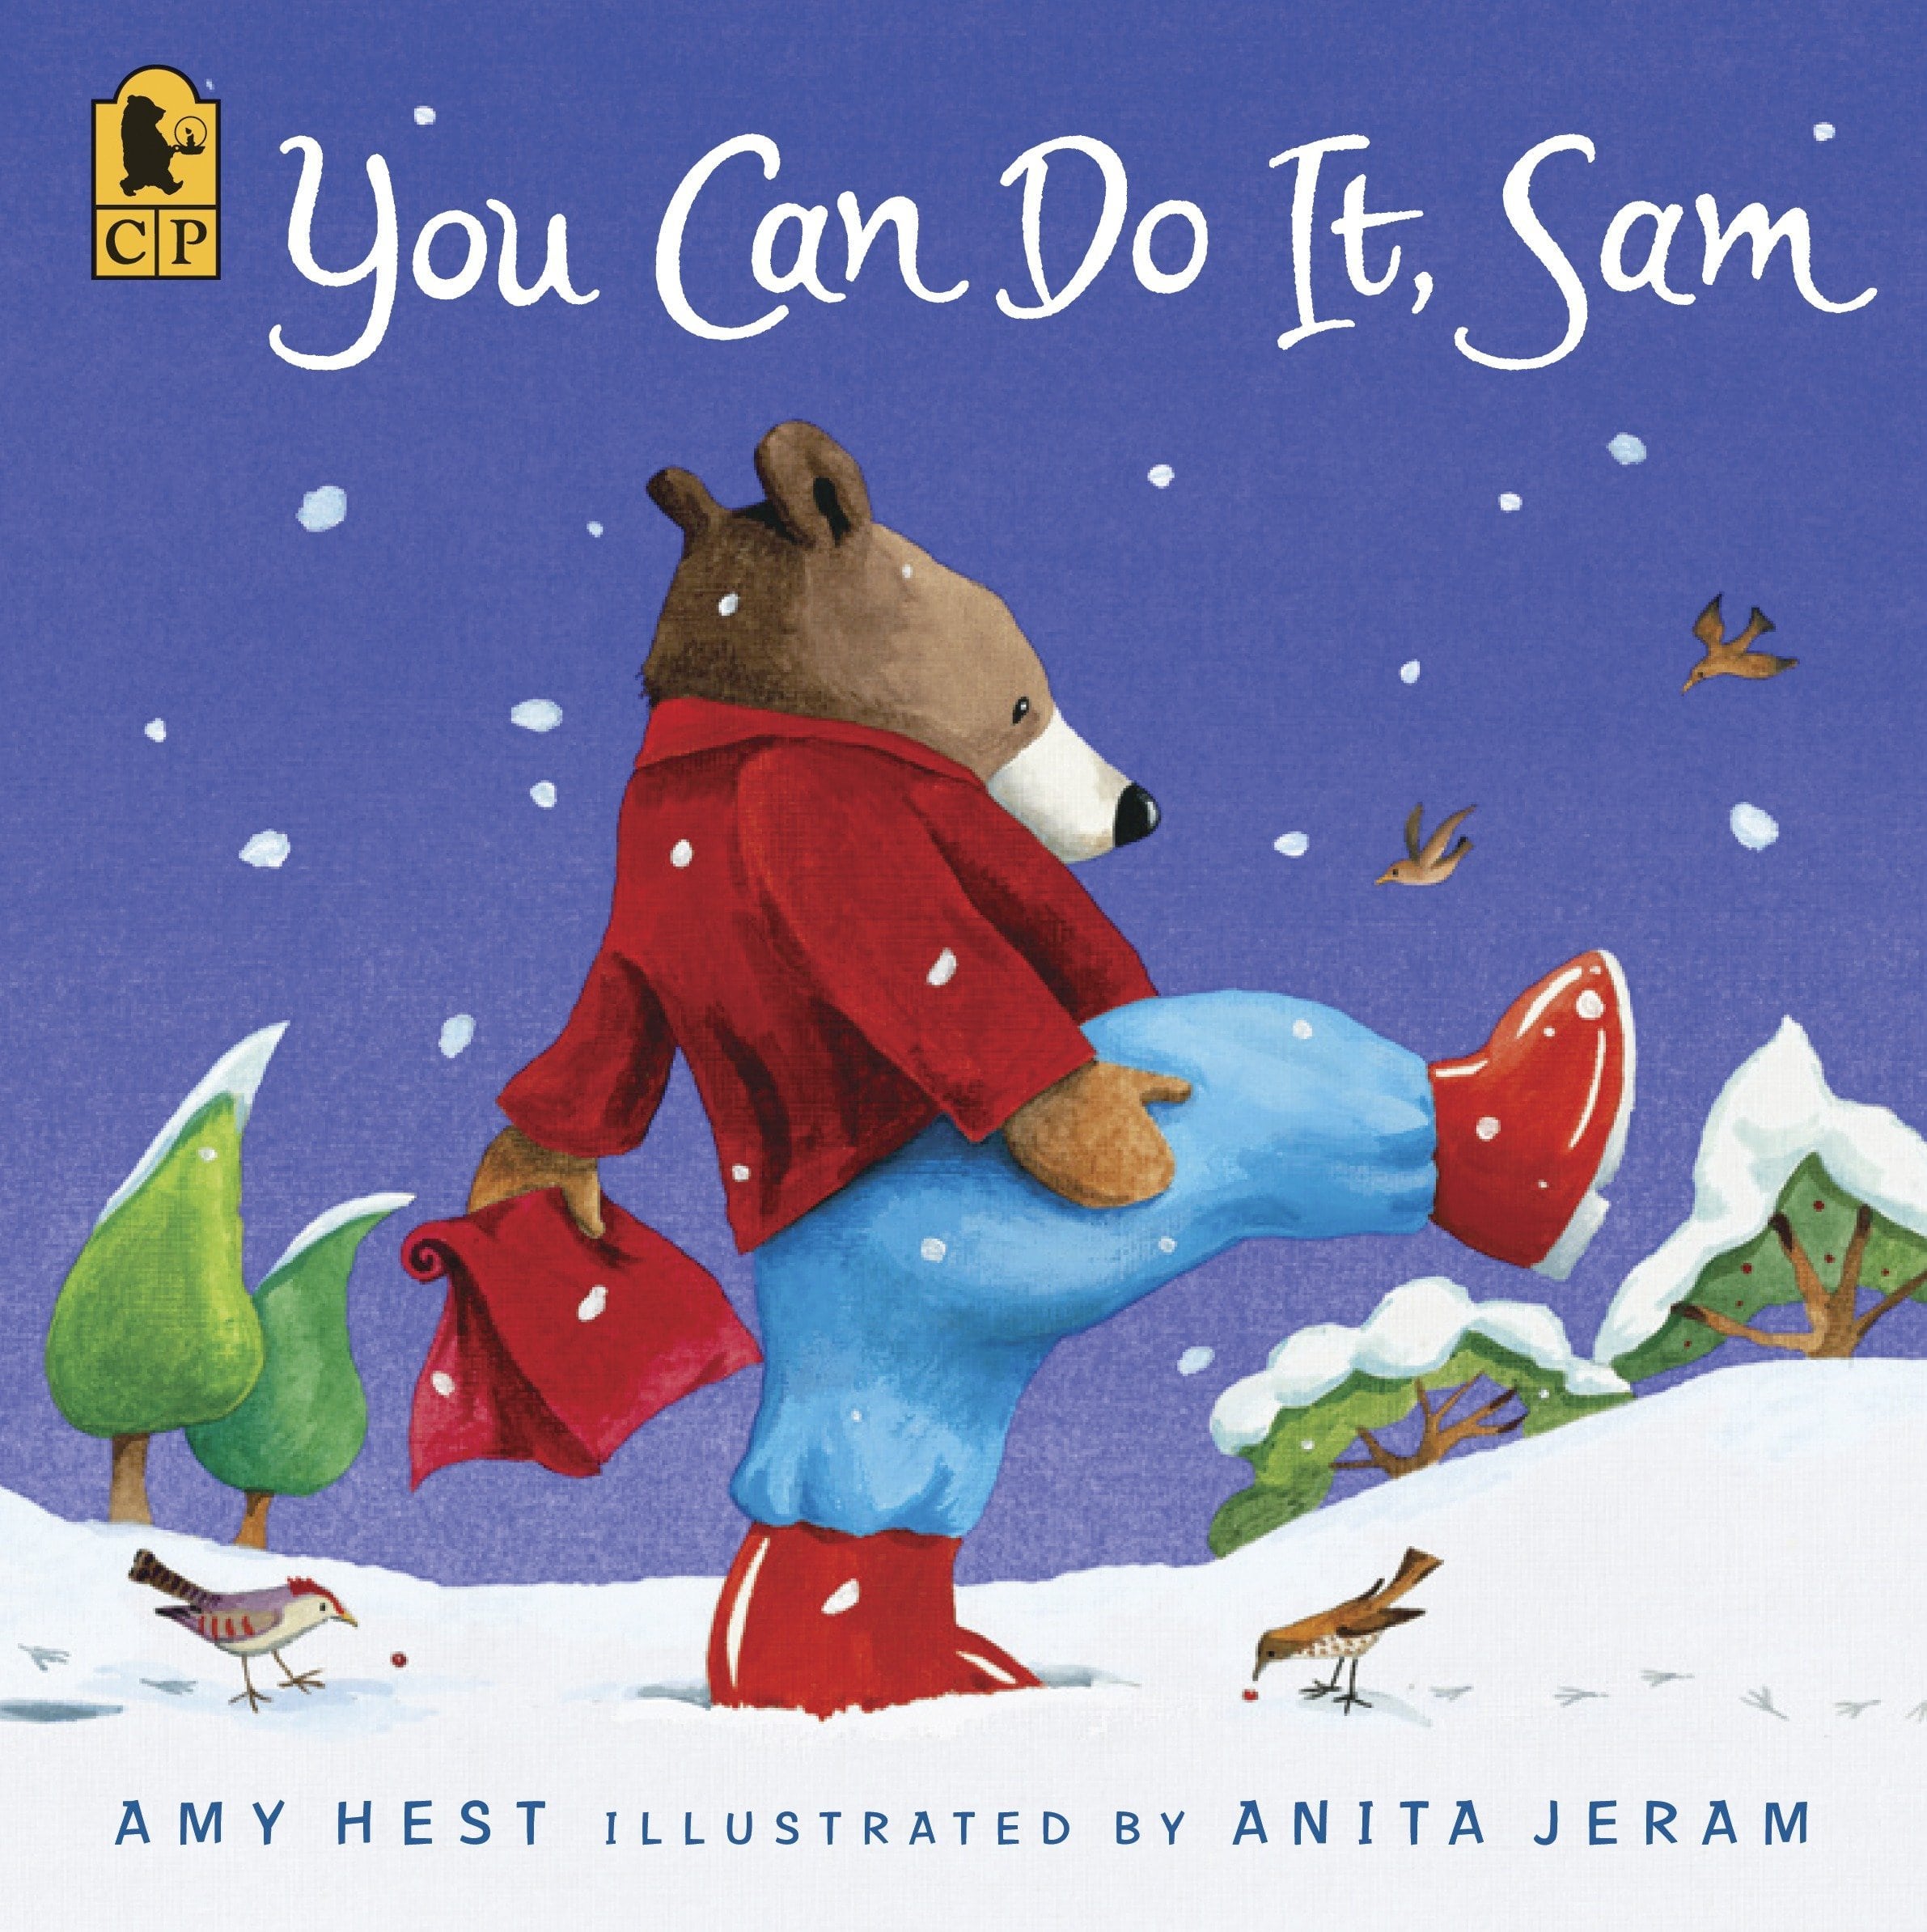 IMG : You can do it Sam